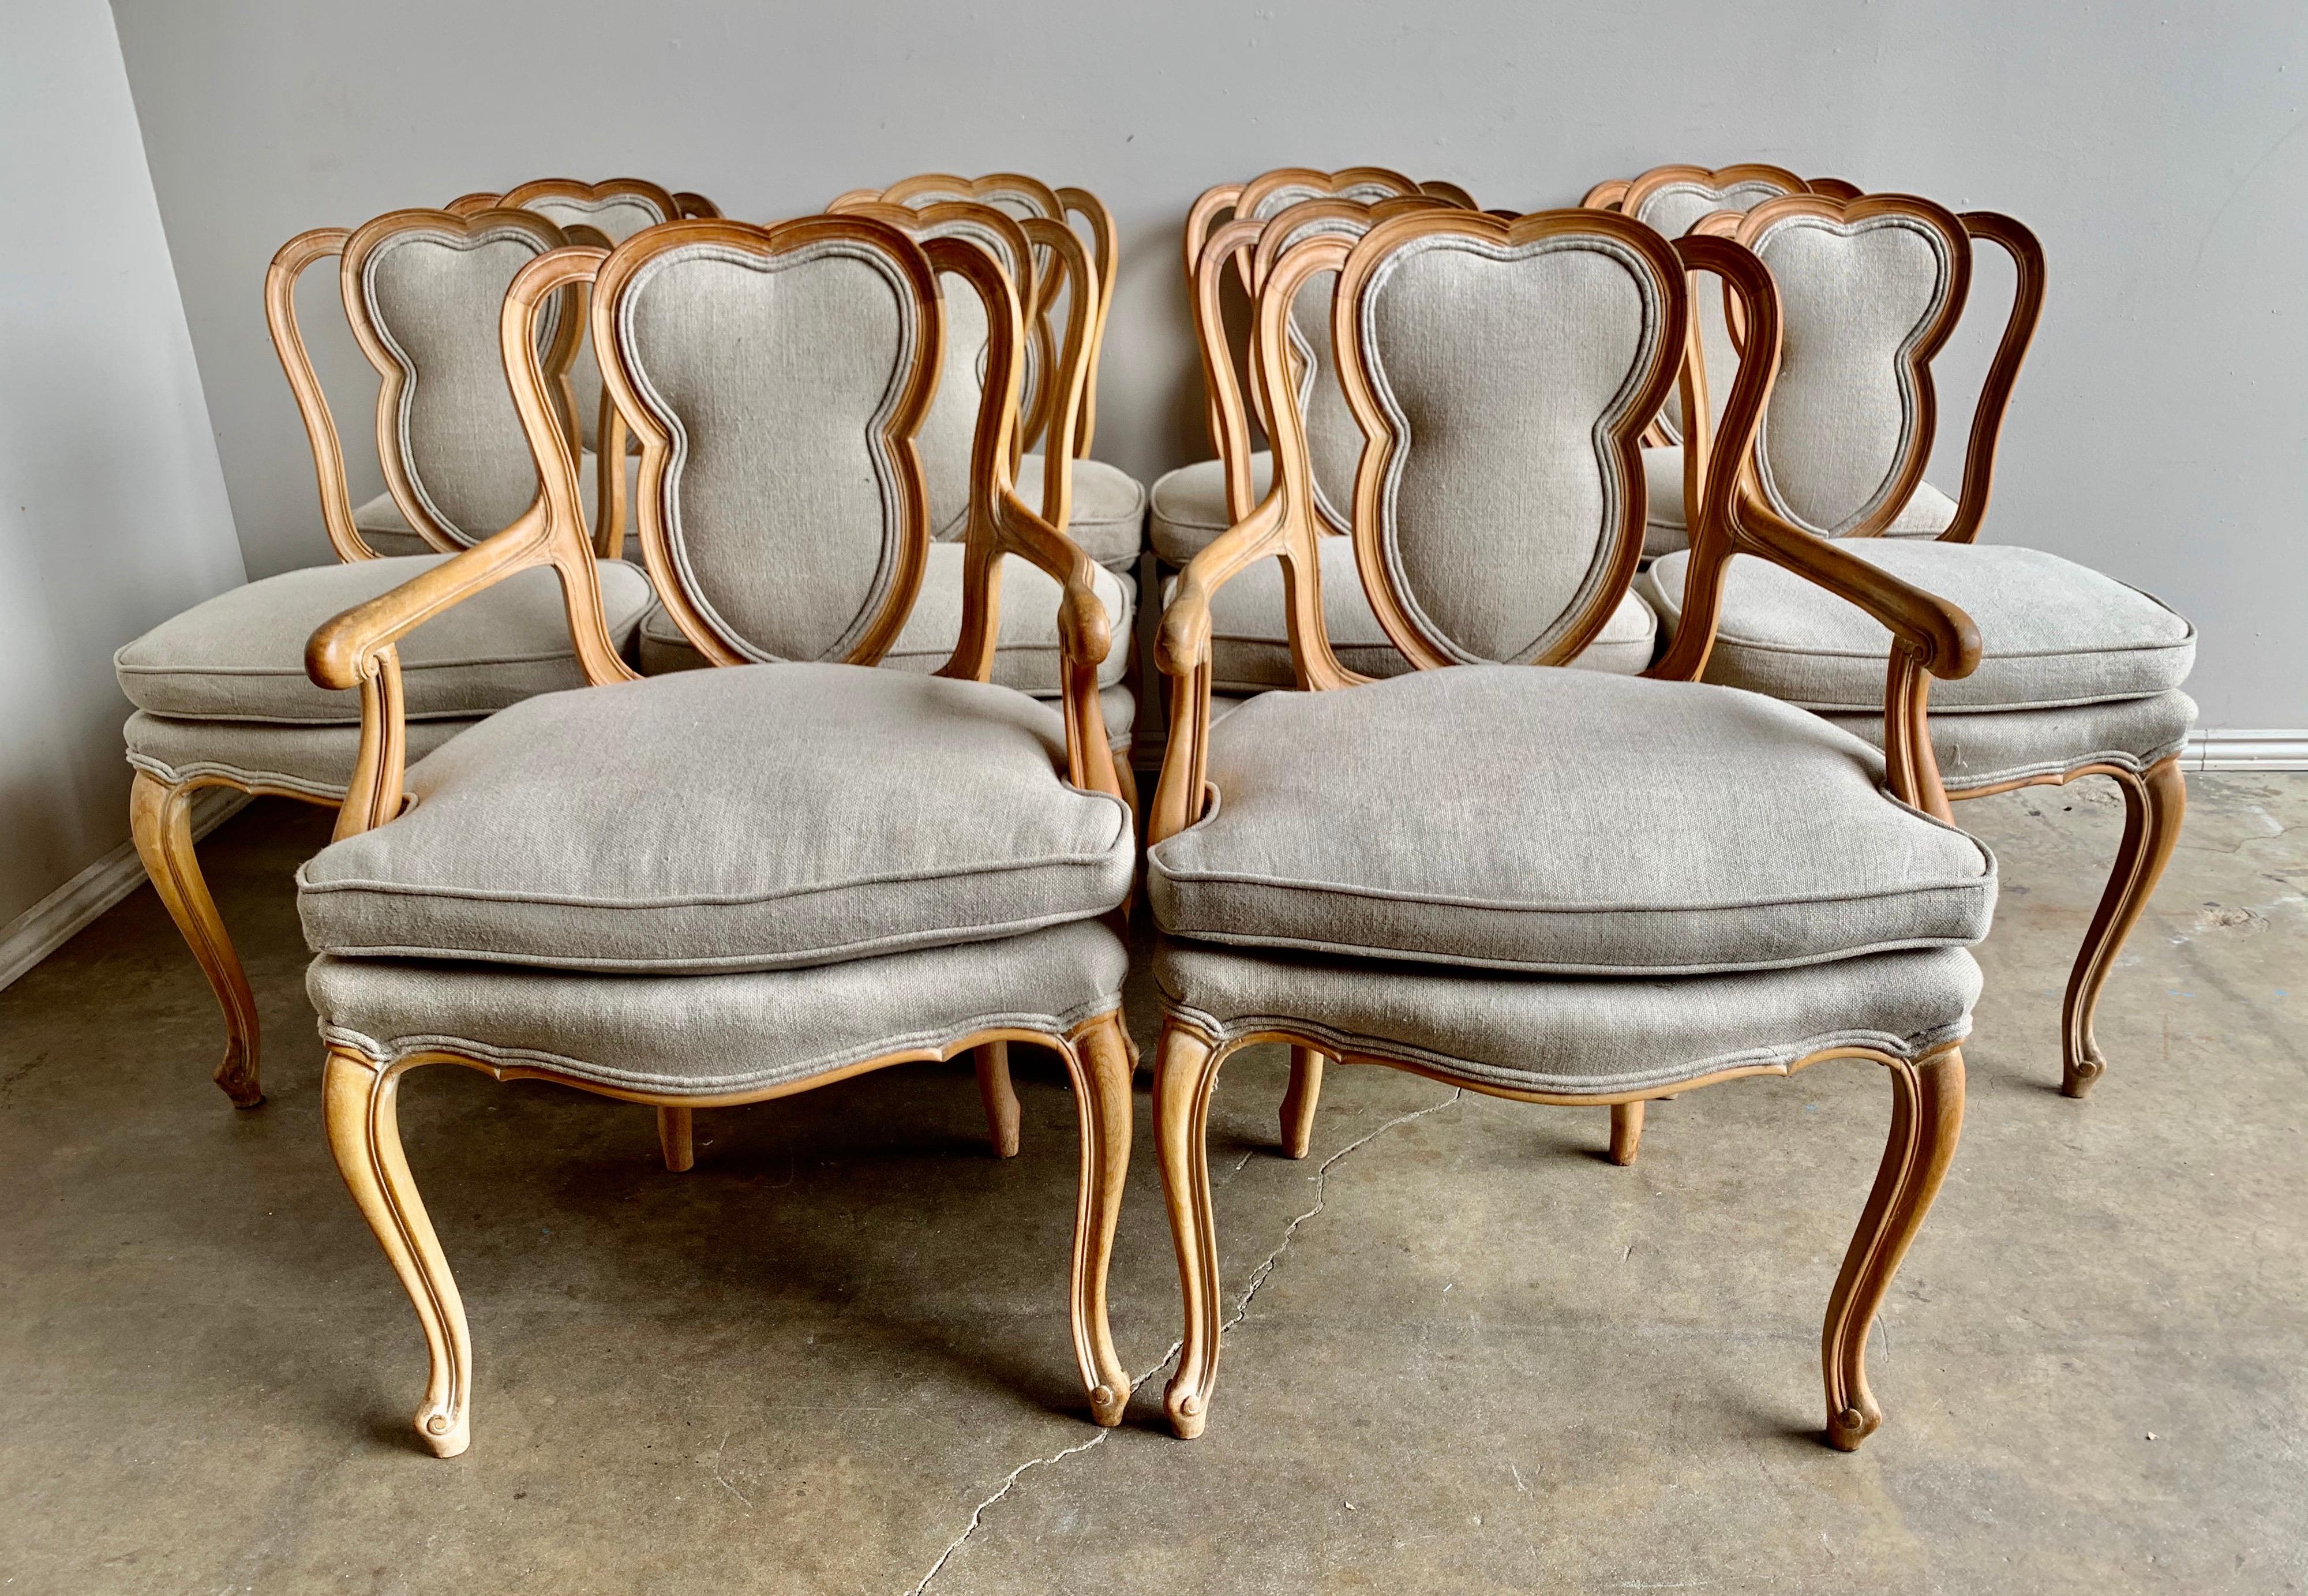 Set of (10) French Louis XV style dining chairs that are newly upholstered in a washed Belgium linen. Loose seat cushions. Measures: Armchairs 24” W x 26” D x 46” H
Side chairs 20” x 20” x 35” H
21” seat height.